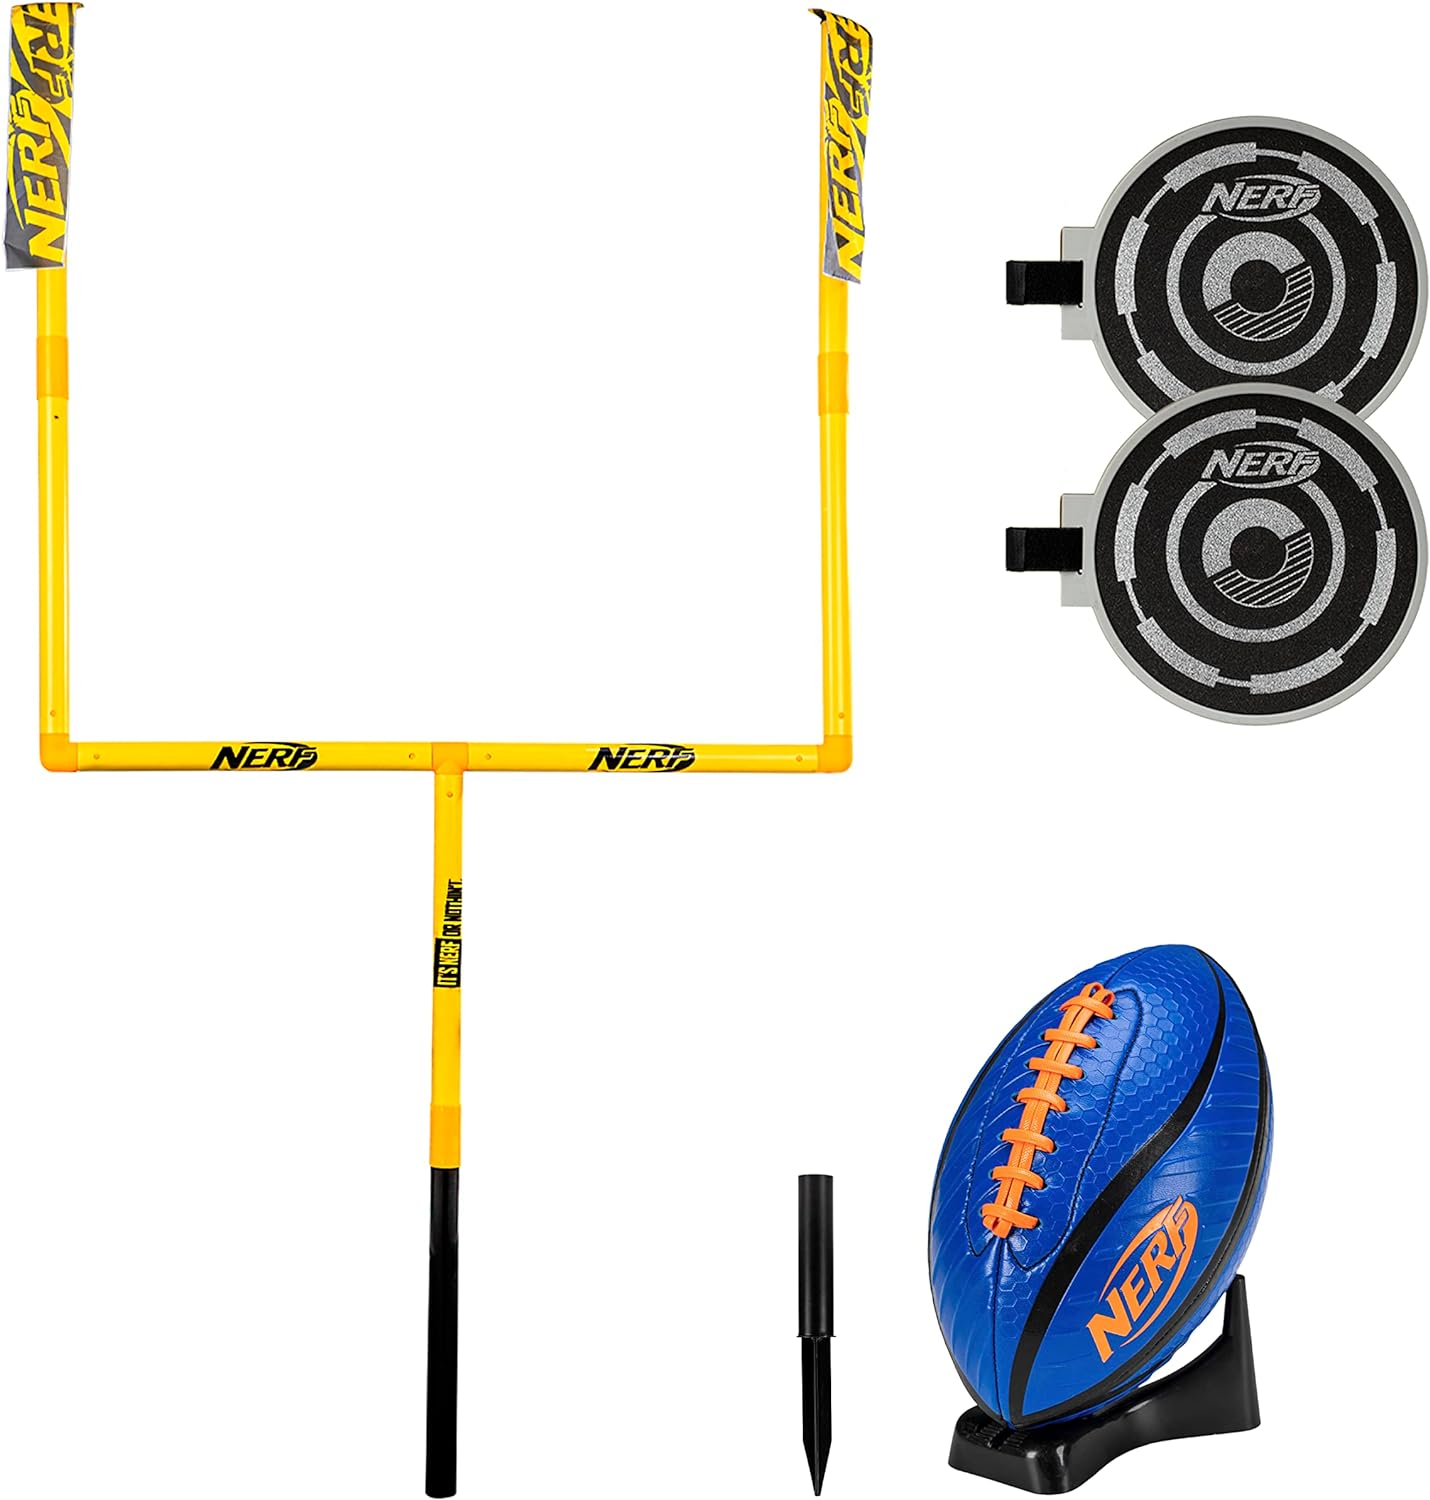 My 9 year old son loves this Nerf Football Punt Set. All his friends at school play football at recess so he' been wanting to lean to plan. This was perfect for him. It' easy to assembly (less than 15 minutes). The directions were easy to follow. It comes with a football stand and hand pump along with the football and goal. This is a great way to get kids back outside and off video games.